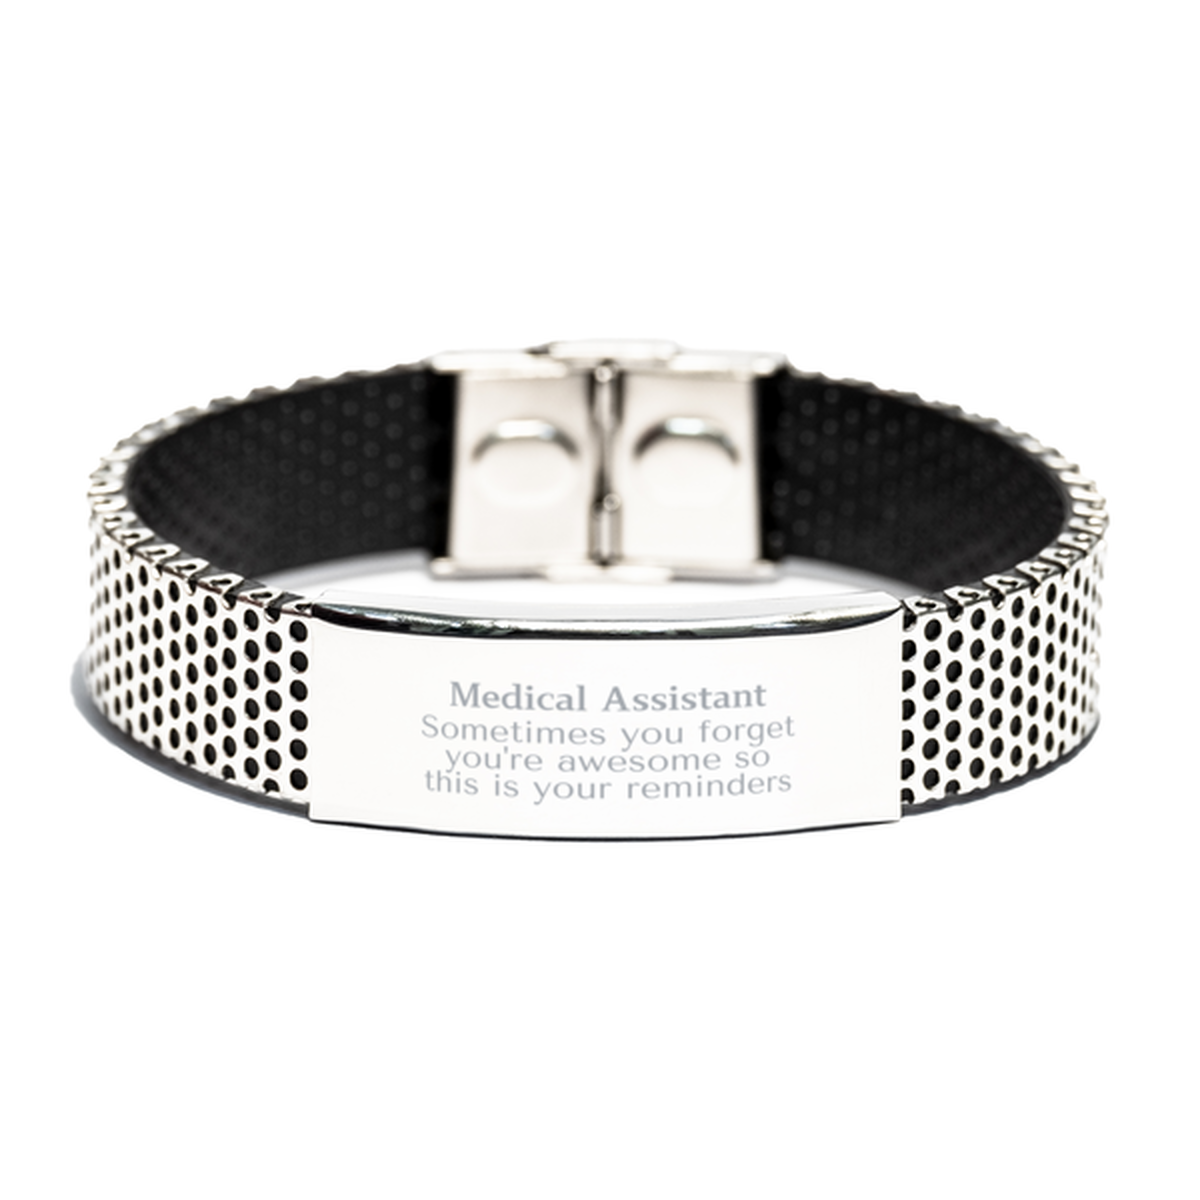 Sentimental Medical Assistant Stainless Steel Bracelet, Medical Assistant Sometimes you forget you're awesome so this is your reminders, Graduation Christmas Birthday Gifts for Medical Assistant, Men, Women, Coworkers